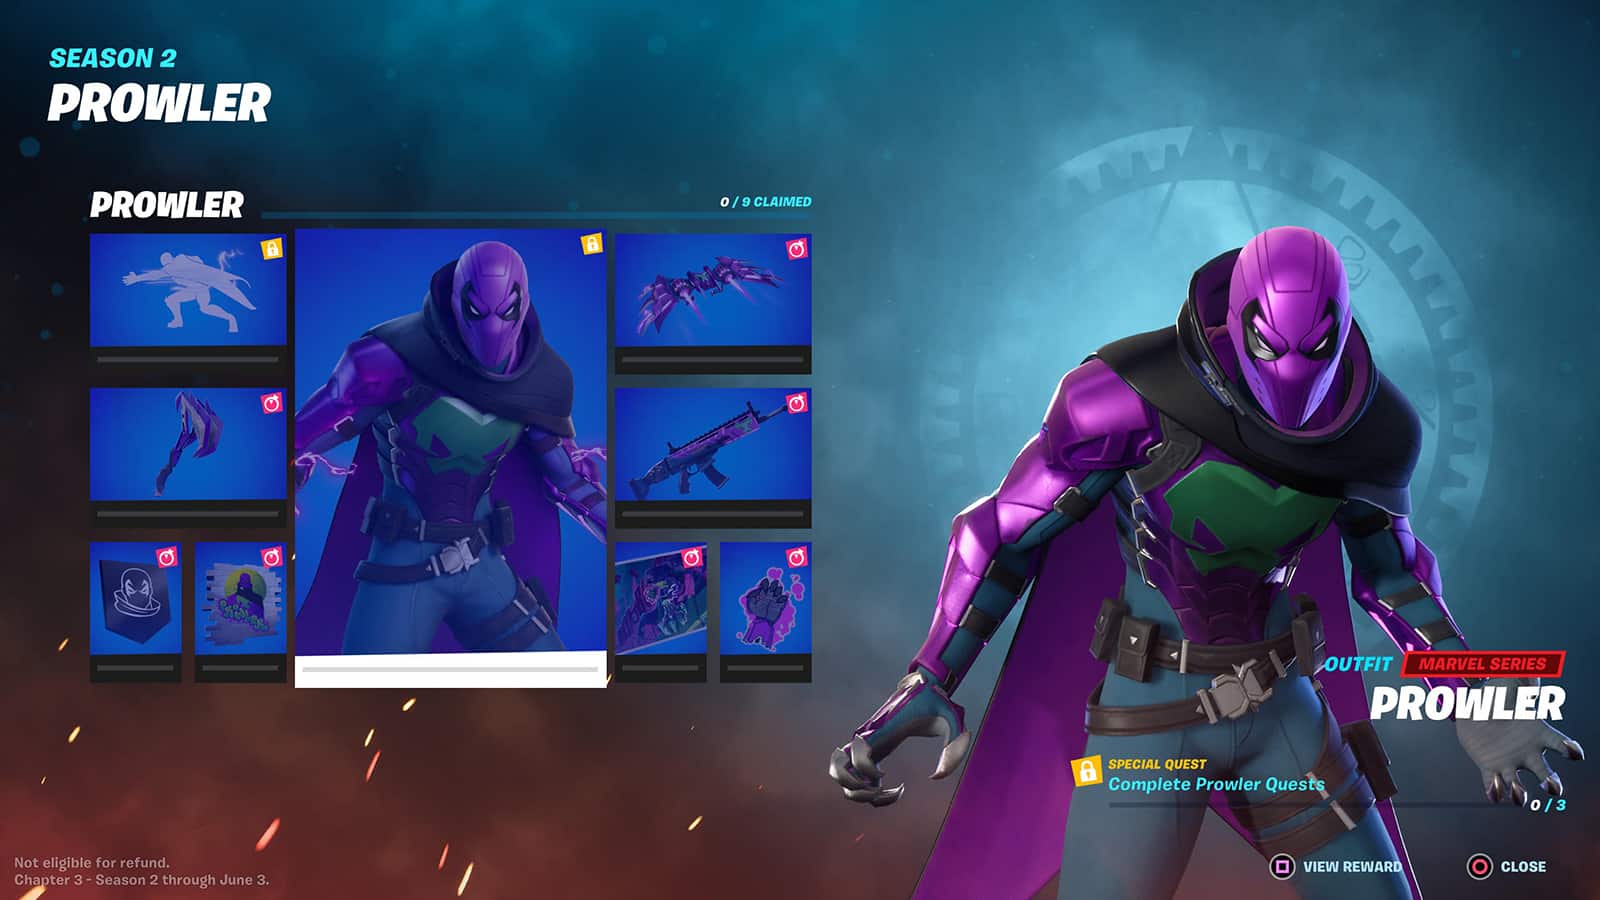 The Prowler skin in the Fortnite Battle Pass